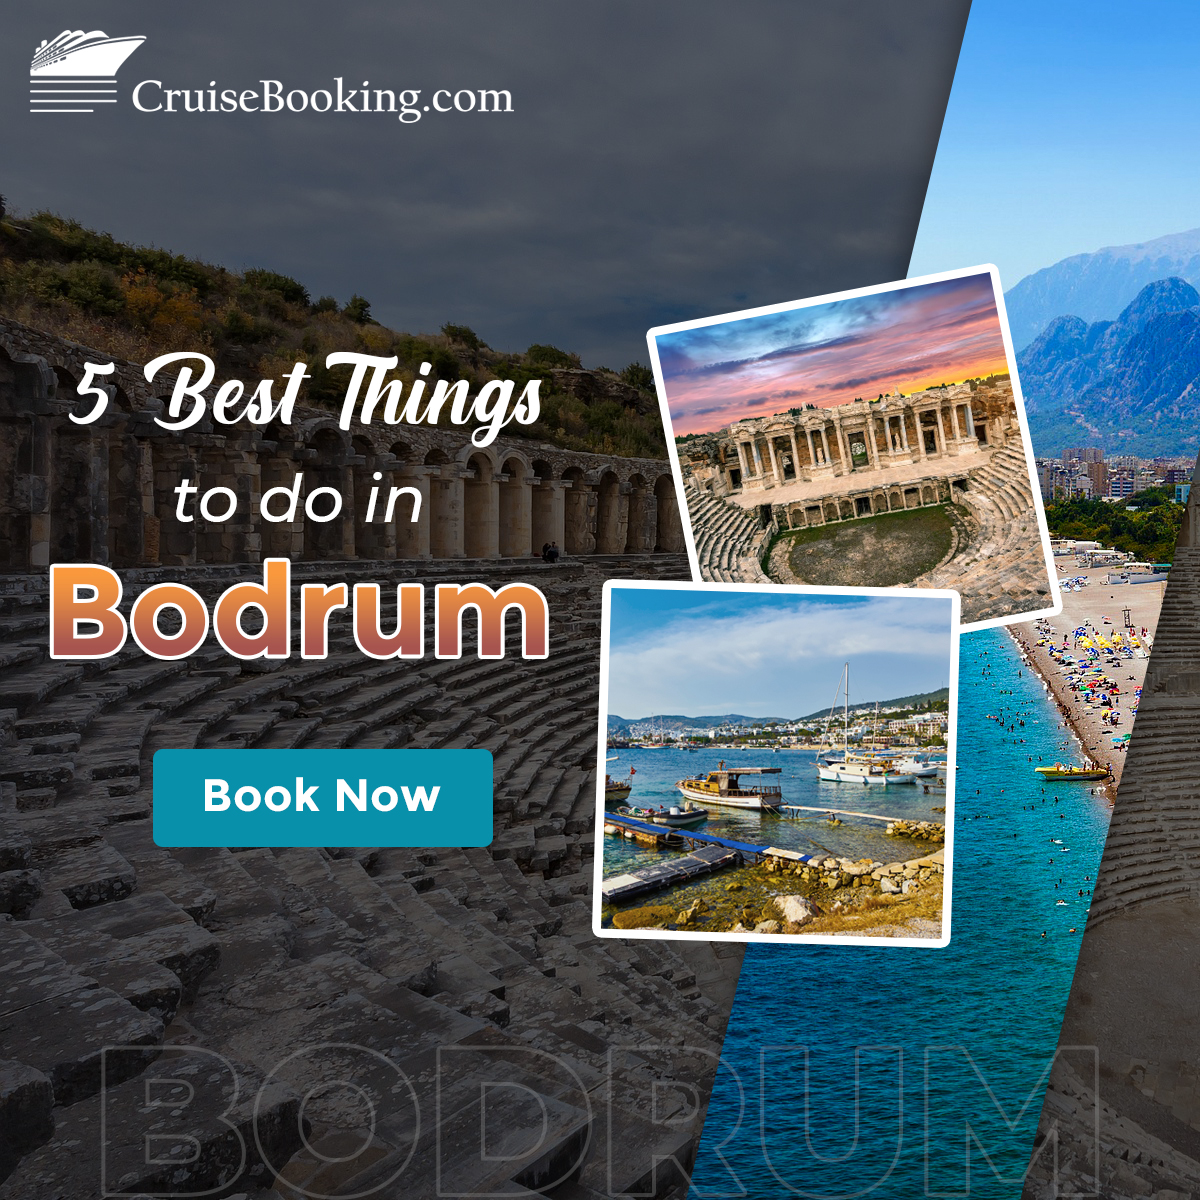 Planning to visit Bodrum, Turkey? Here are the 5 best things to do in the city that you don’t want to miss.

cruisebooking.com/articles/middl…

#cruise #cruisebooking #bodrum #luxuryvibes #familytravel #bodrumotelleri #bodrumstreets #turkey #istanbul